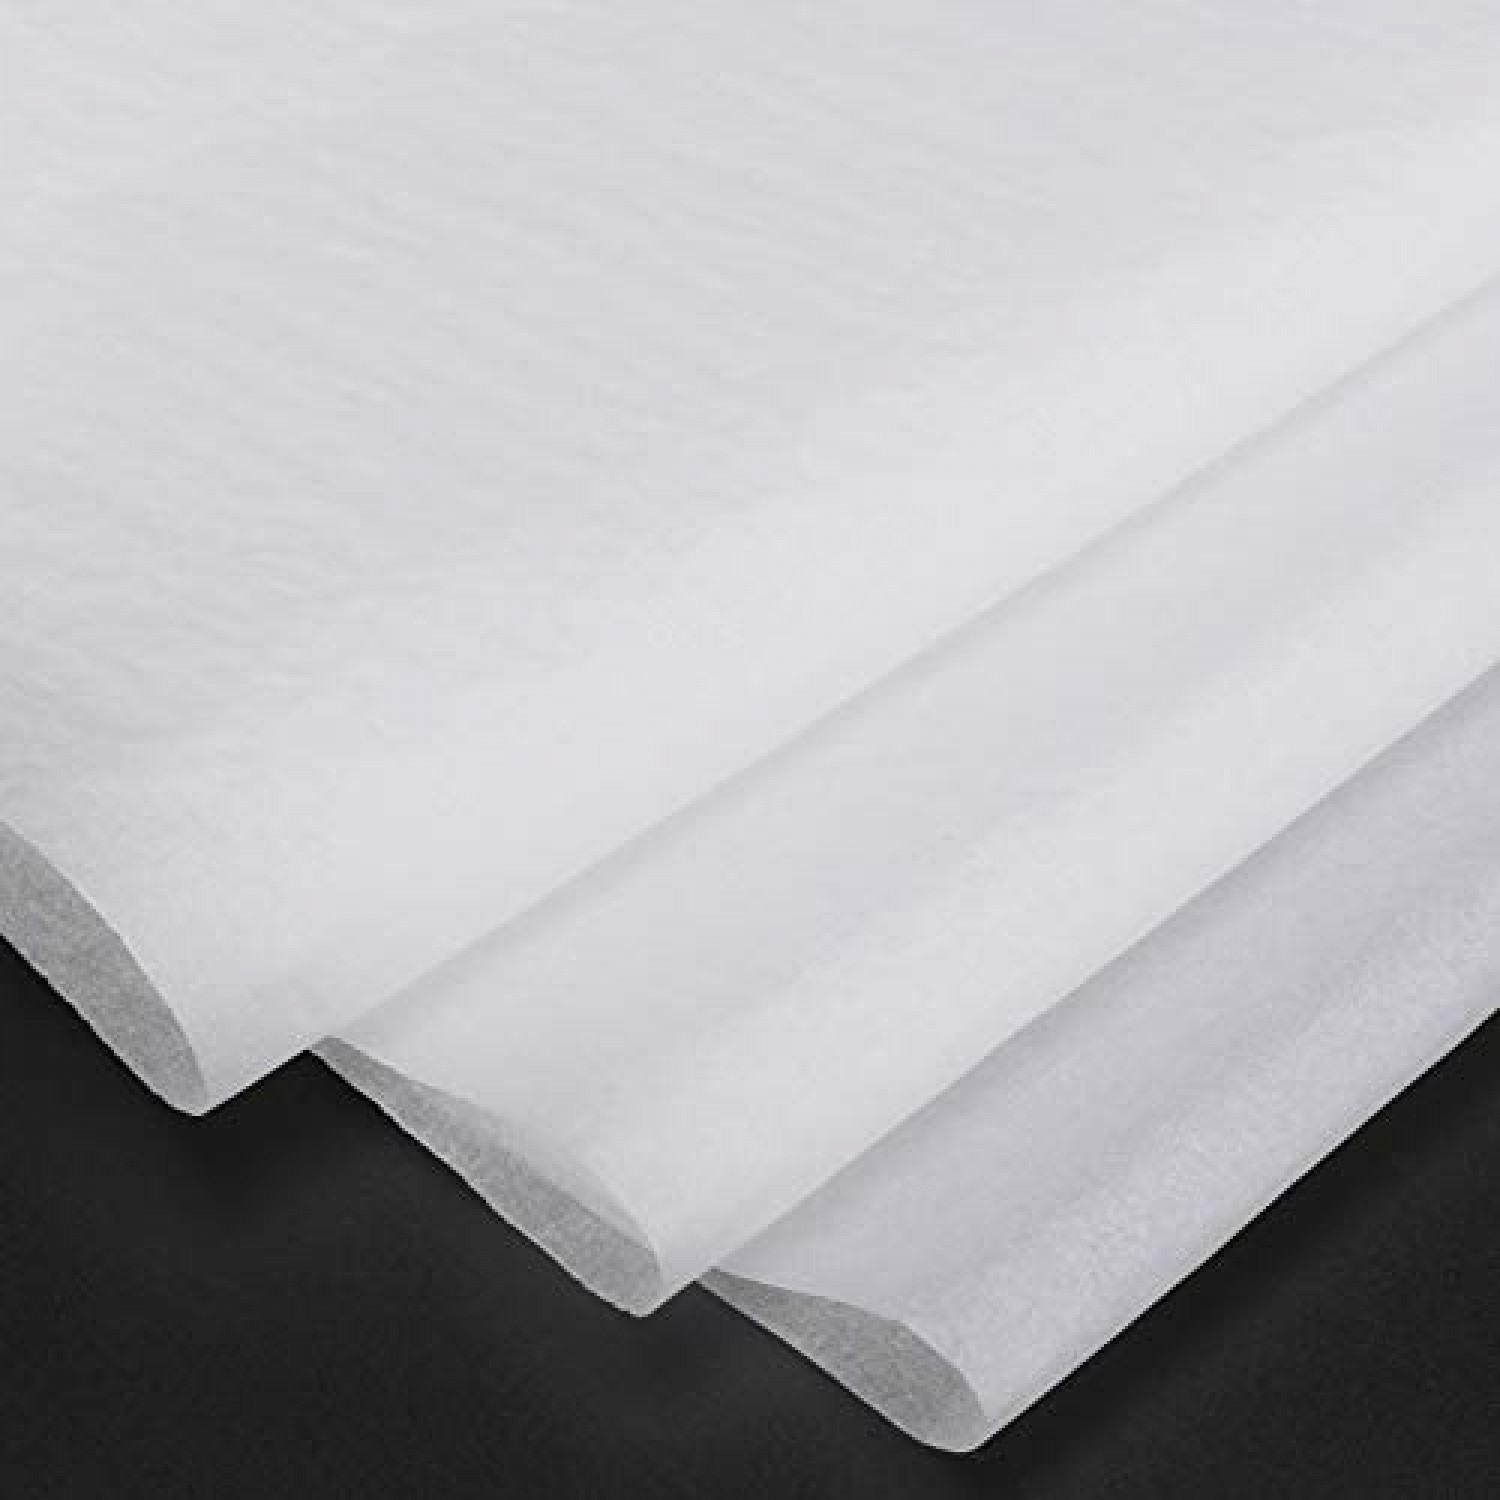  Yeaqee 100 Sheets 100 Sheets 27x19 Inches Wet Strength White Tissue  Paper Wrapping Paper Sheets Packing Tissue Paper for Model Making, Media  Crafts Etc Resistant to Tearing When Wet : Health & Household